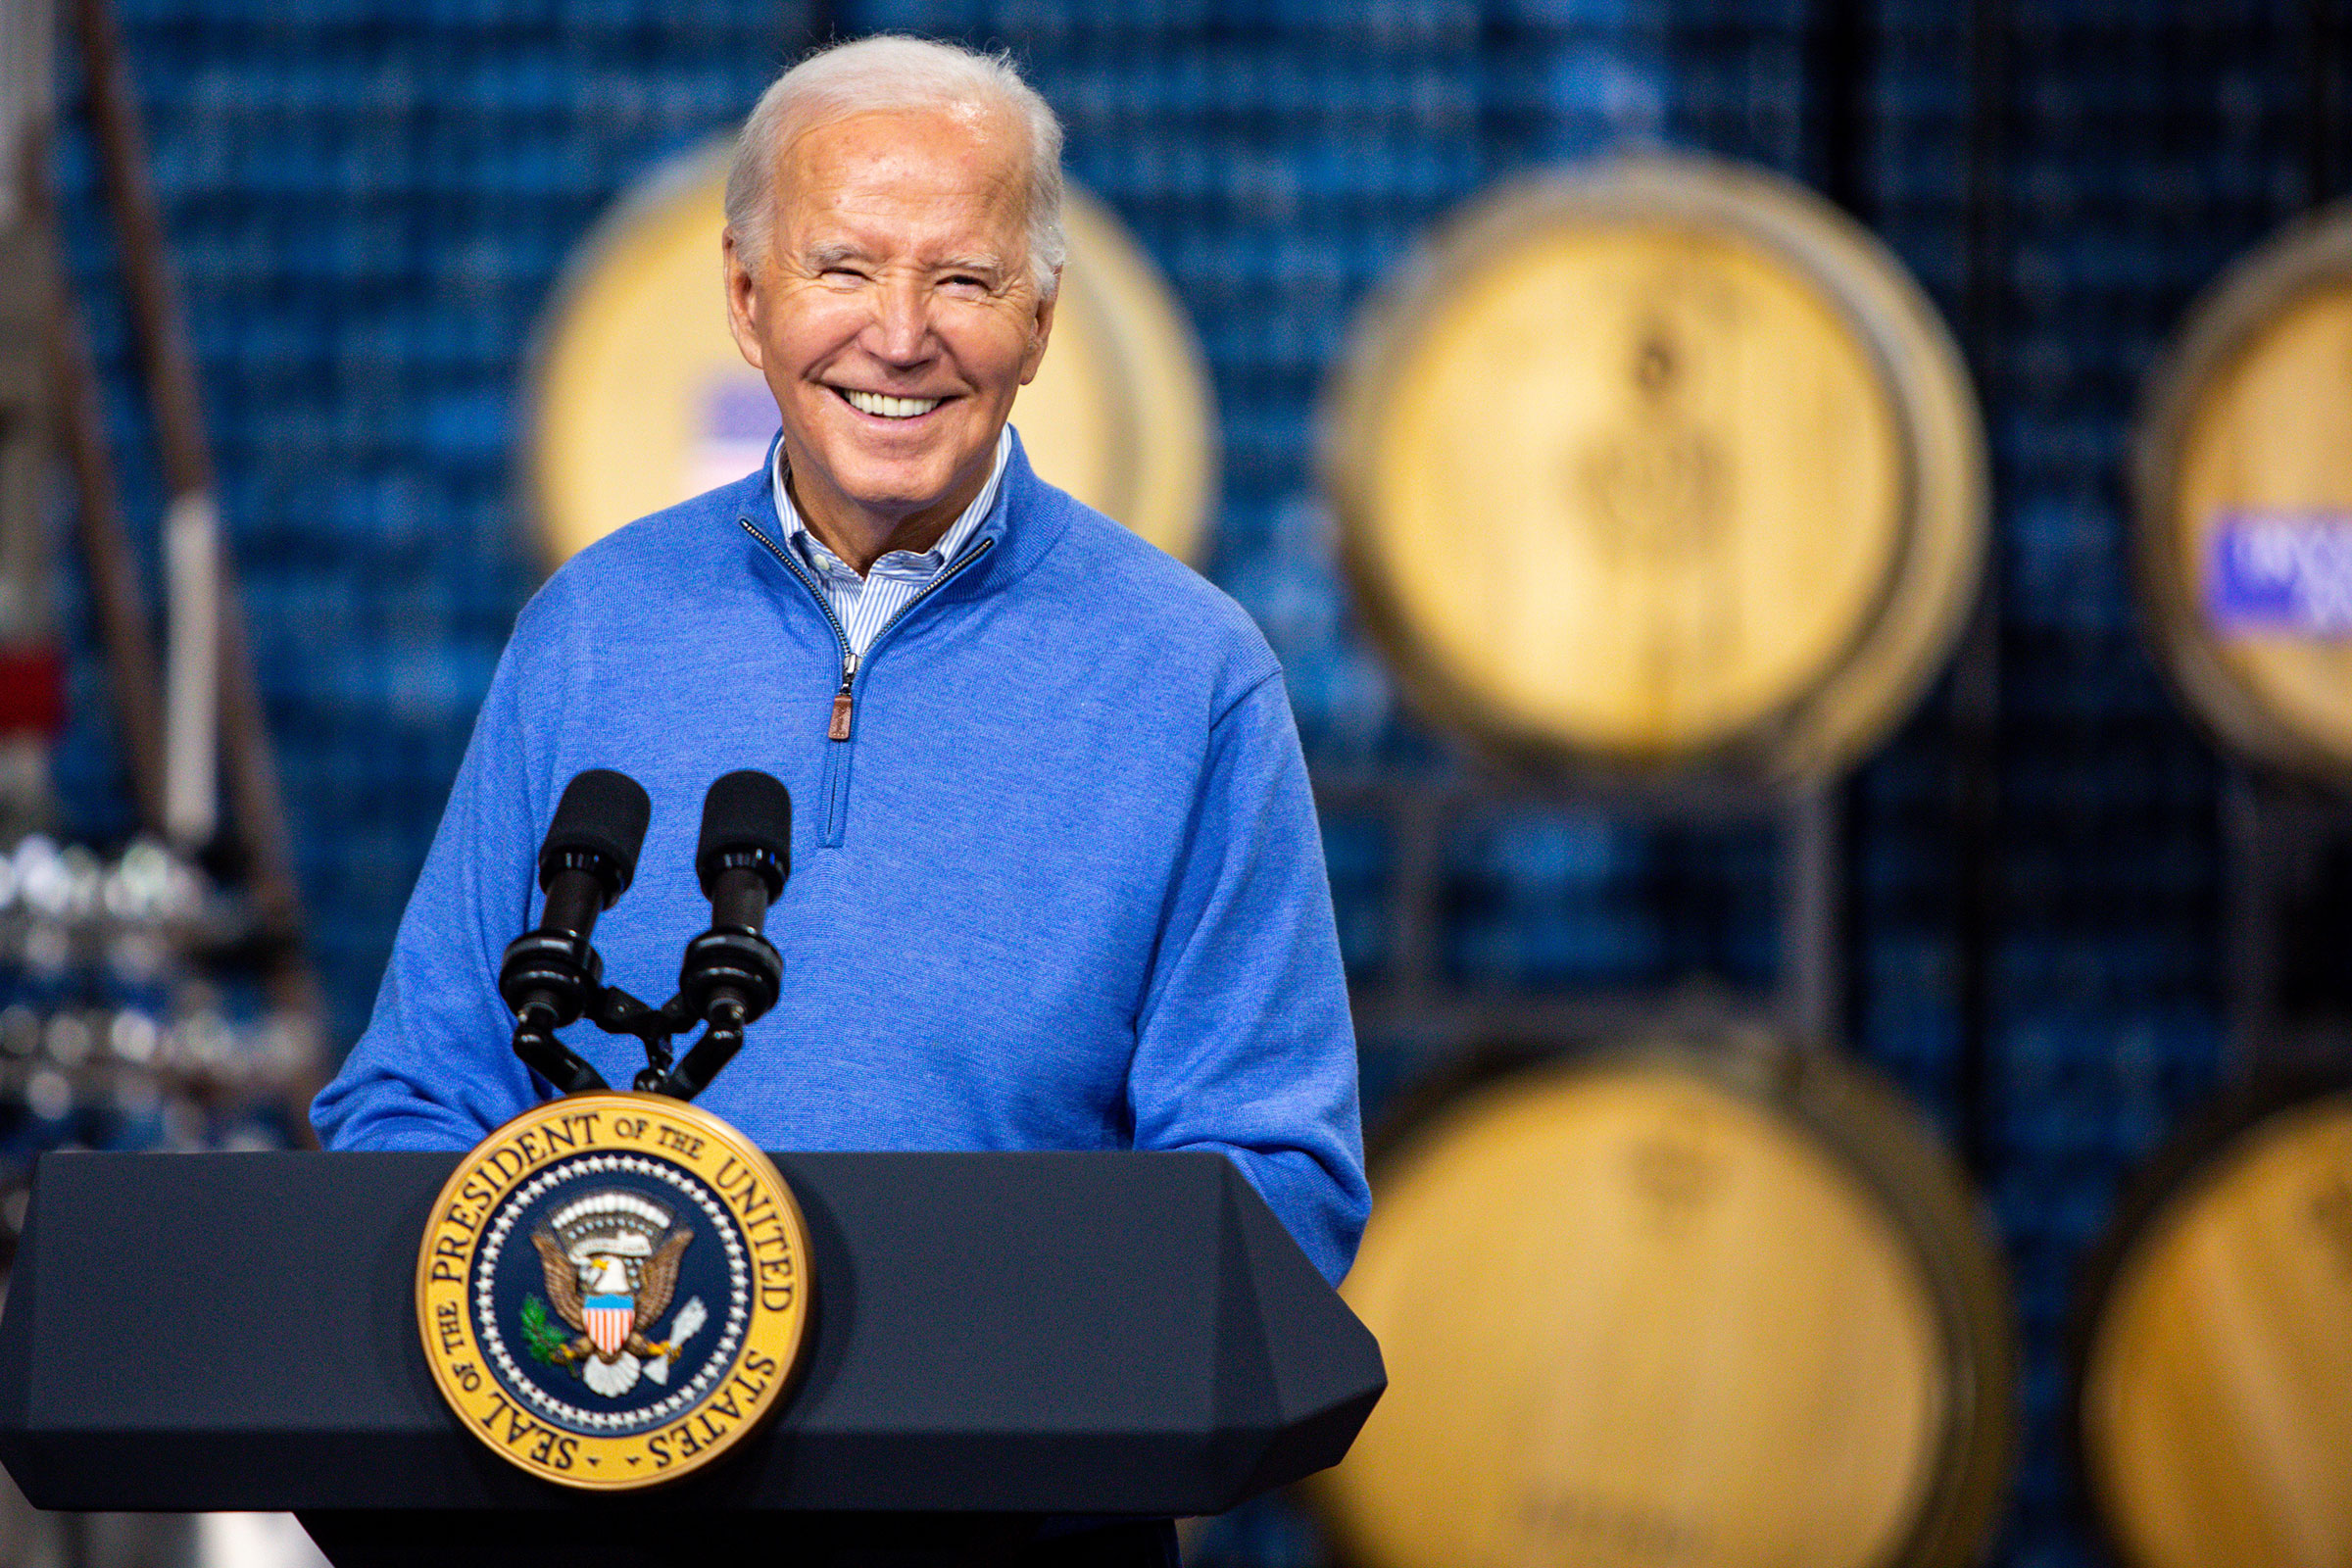 President Joe Biden during an event at Earth Rider Brewery in Superior, Wisconsin, on Thursday, January 25.